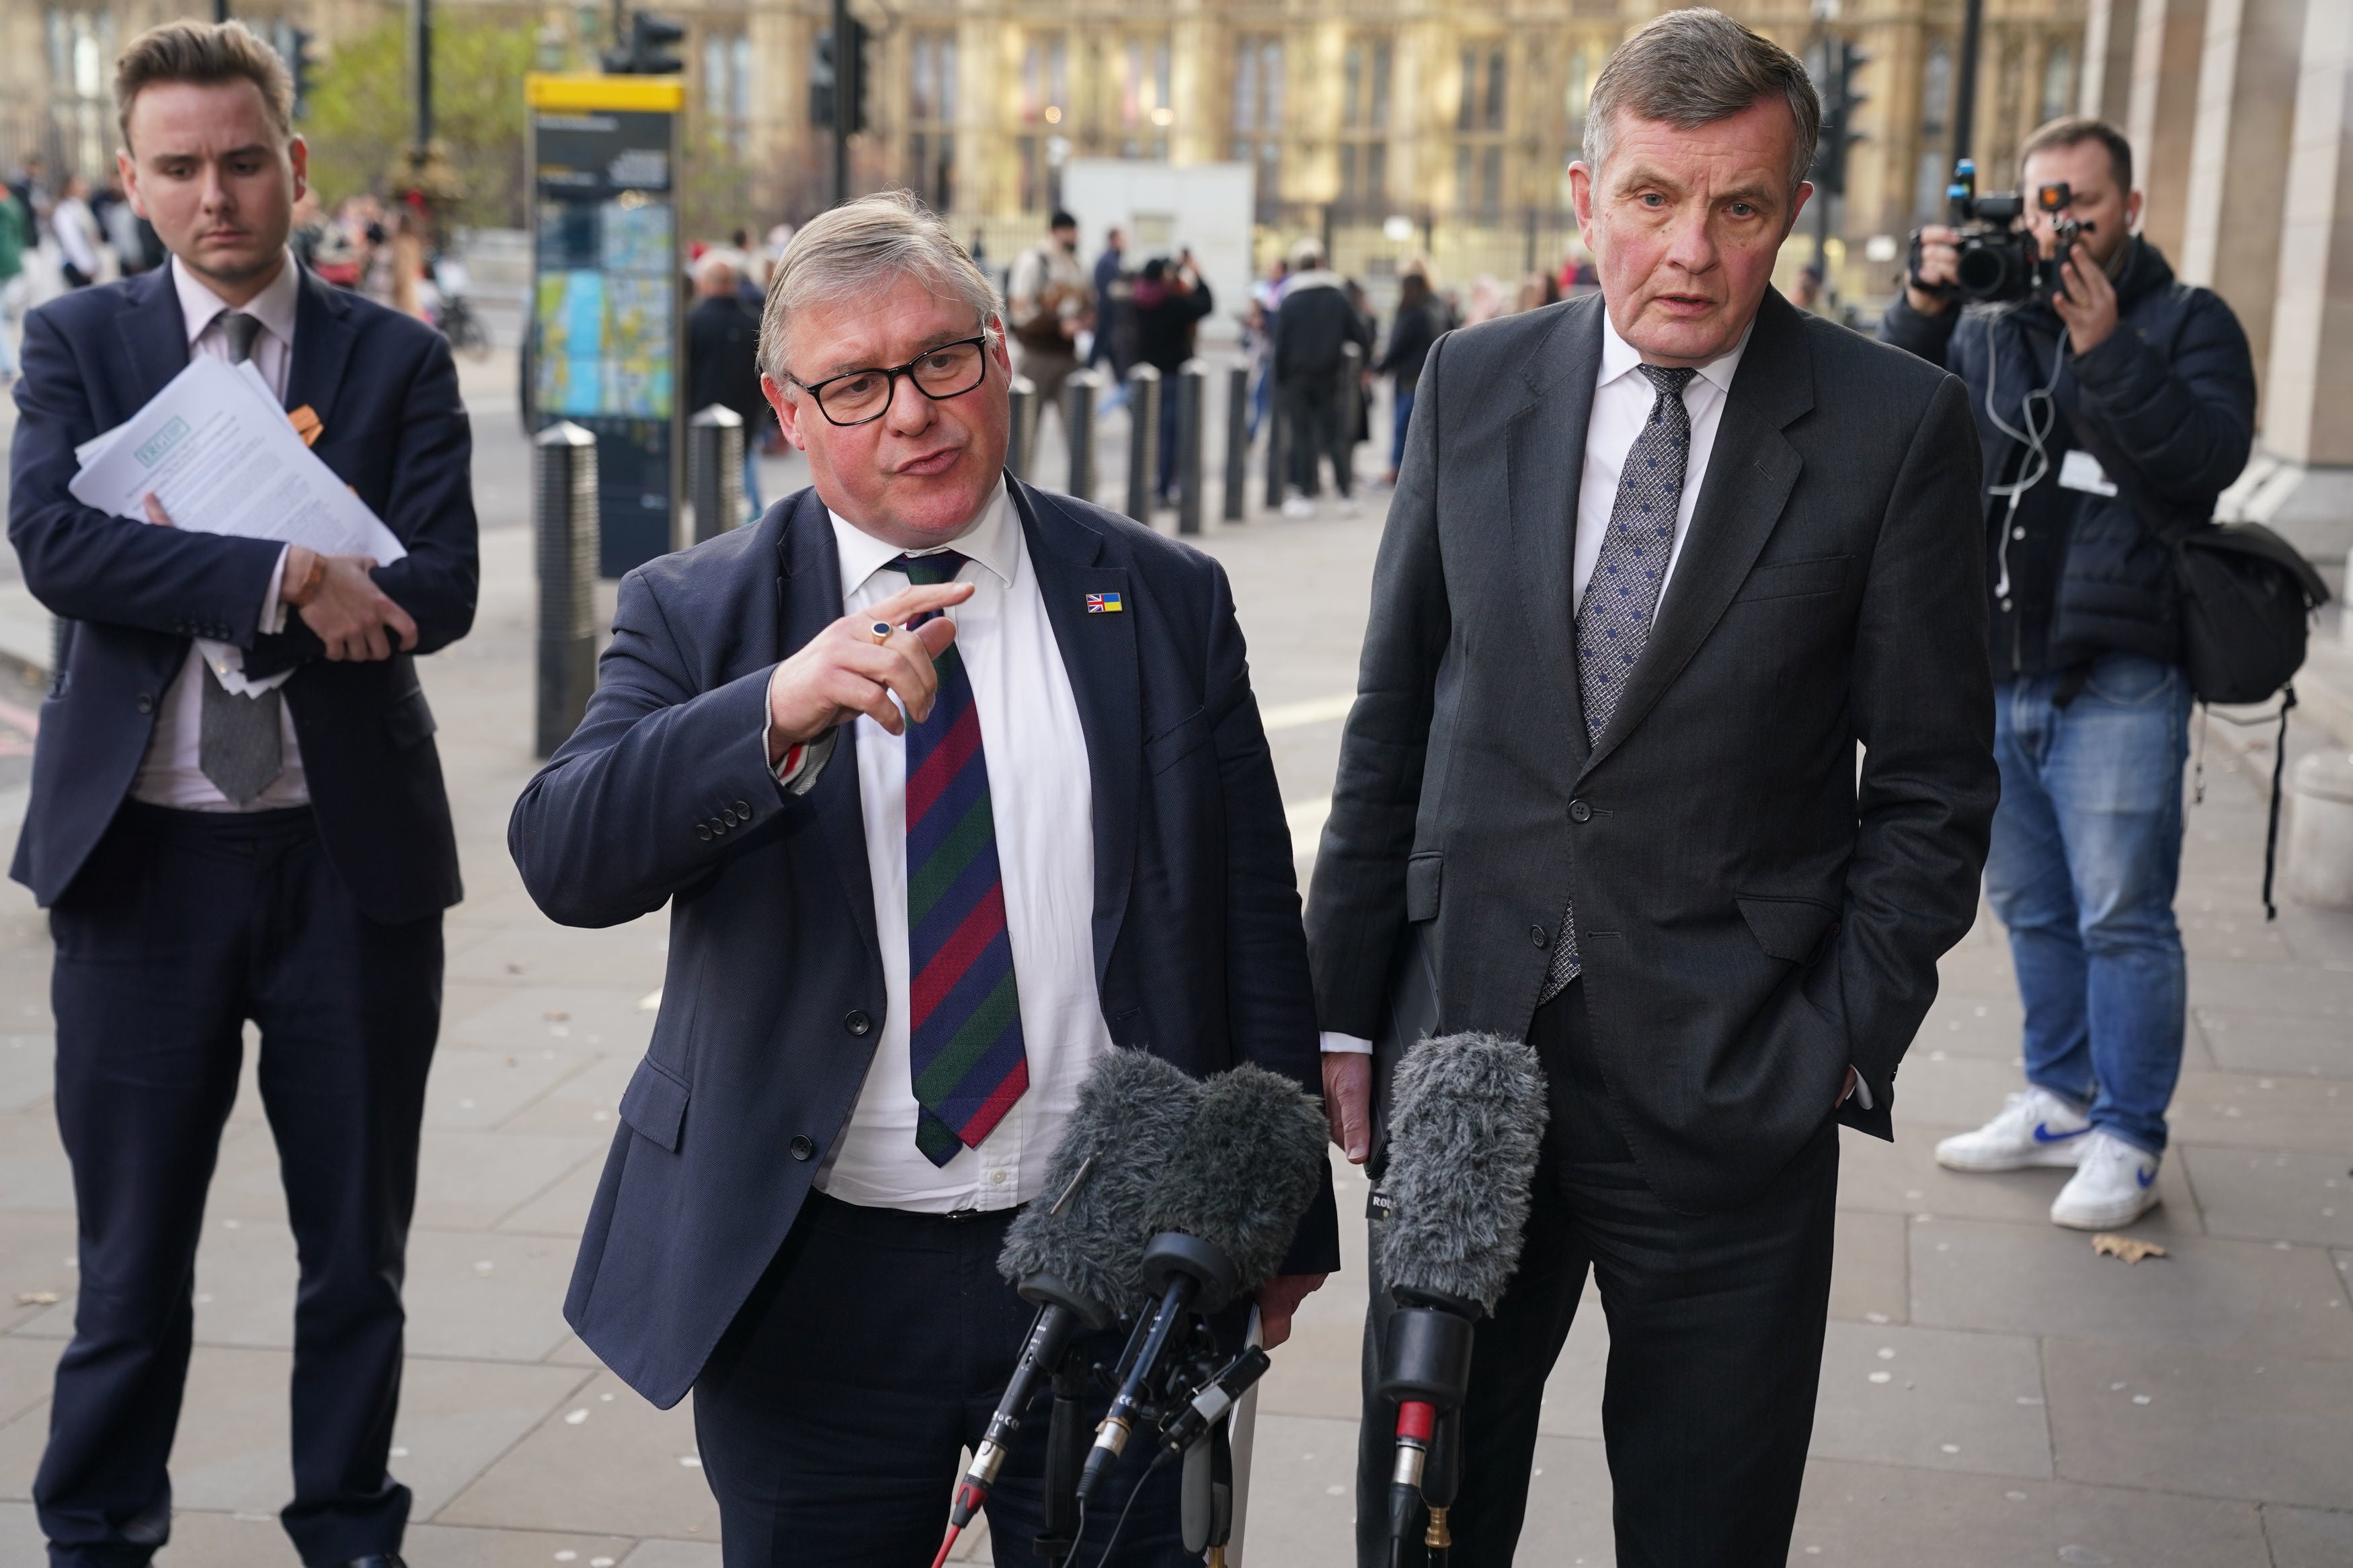 Former minister and member of the ERG David Jones (right, with Mark Francois) is highly critical of the planned treaty